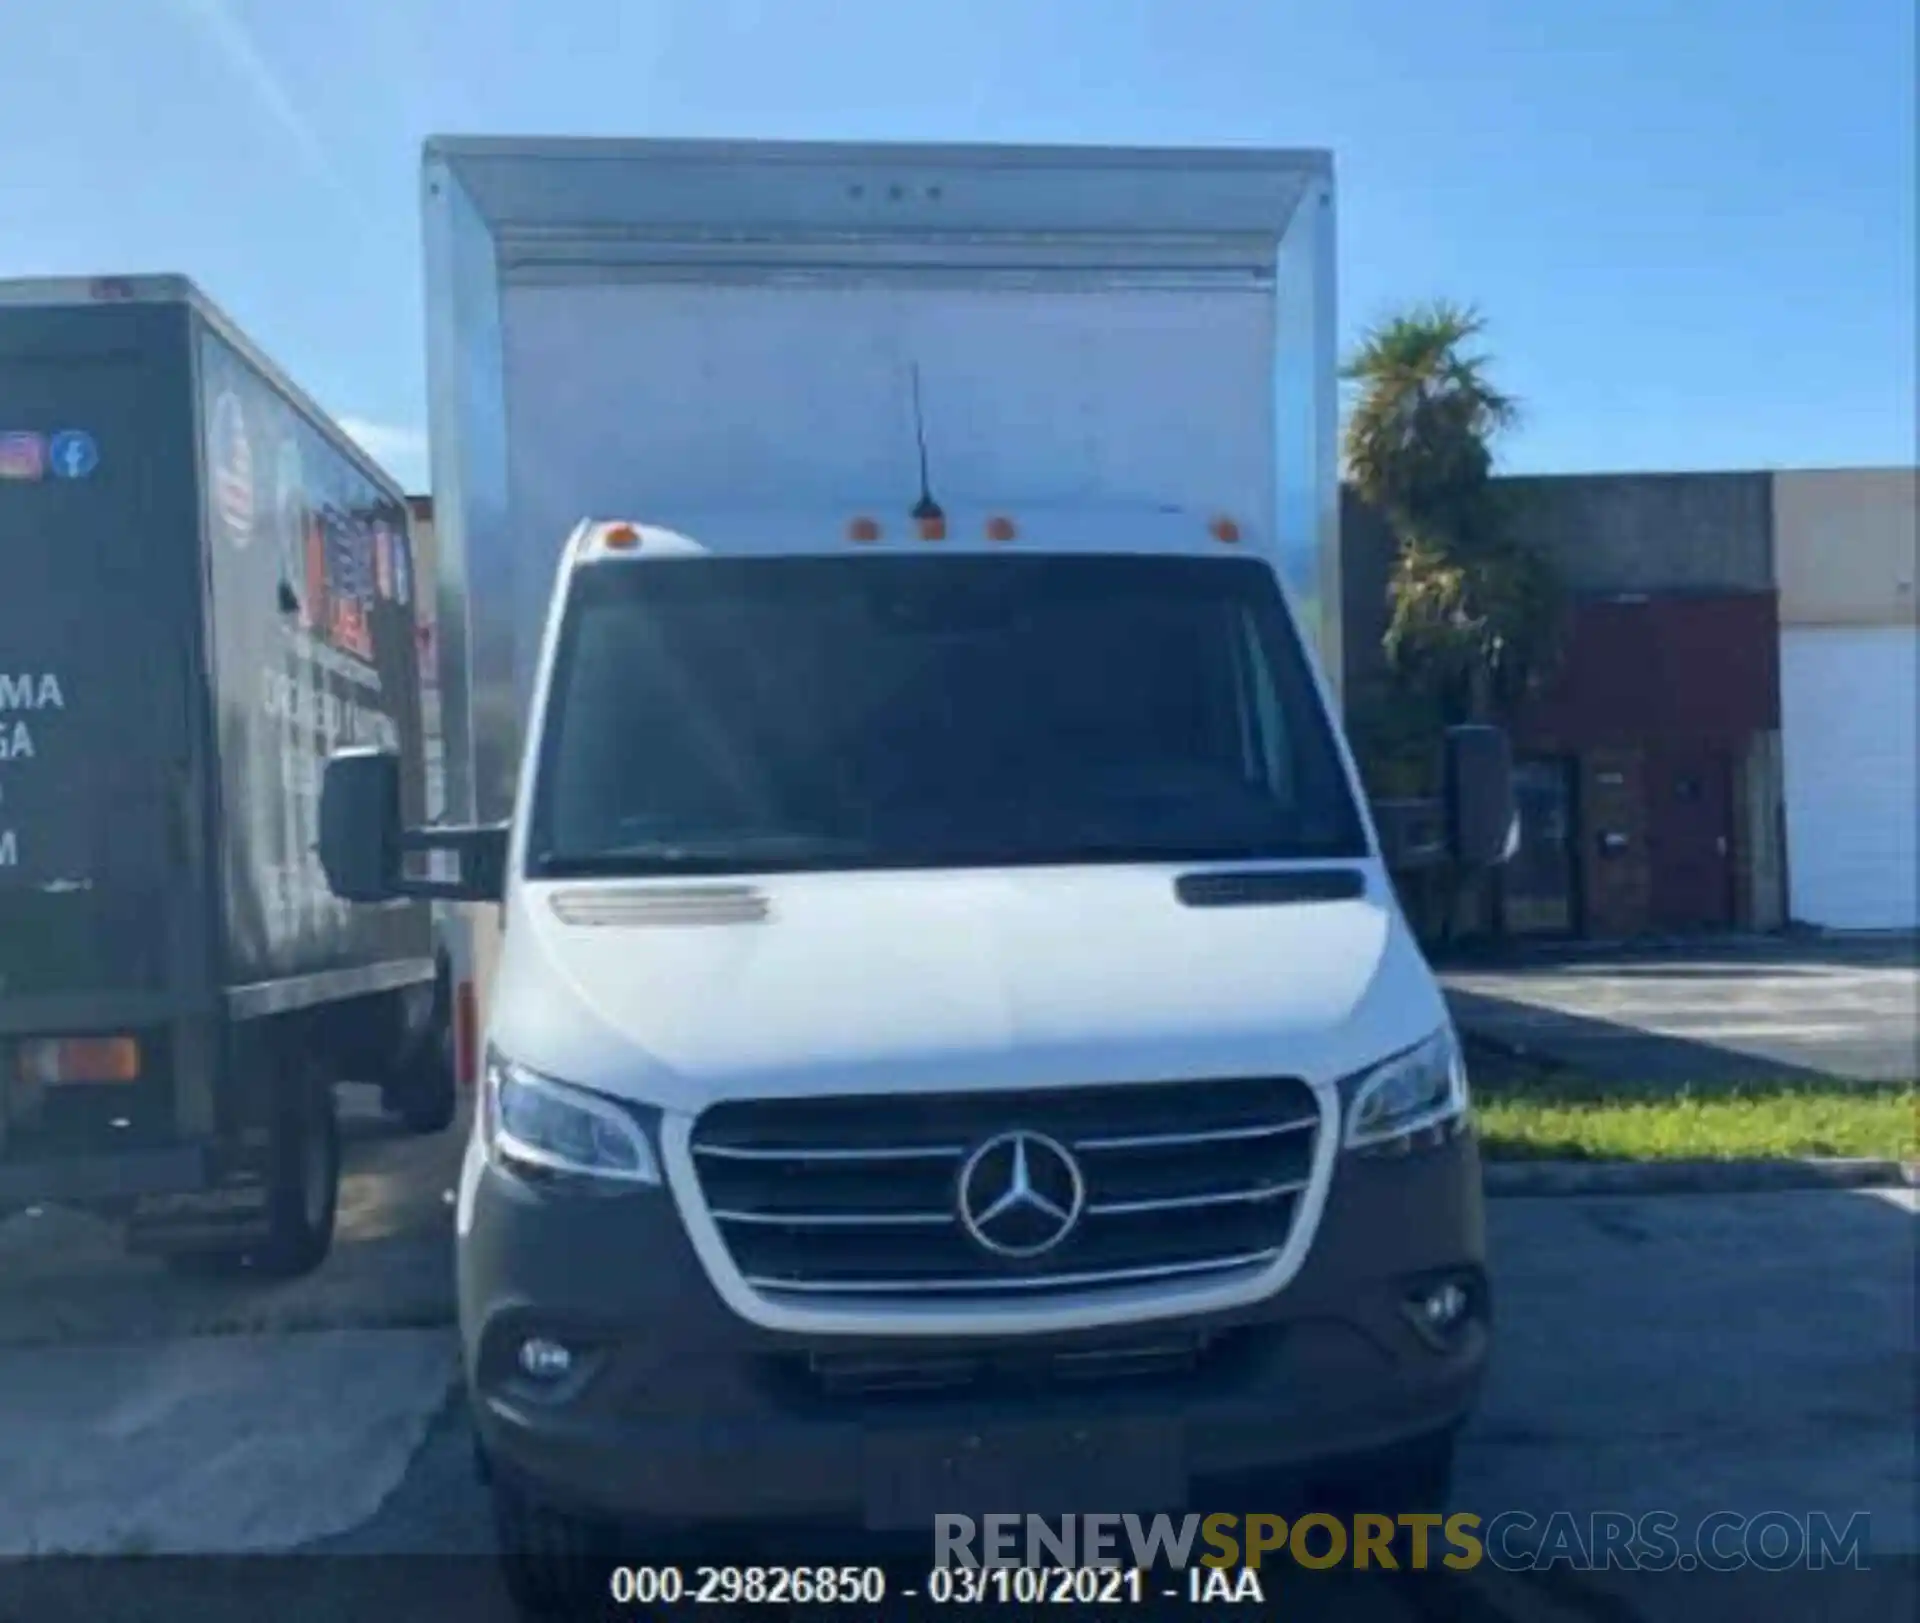 8 Photograph of a damaged car WDAPF4CD3KN013563 MERCEDES-BENZ SPRINTER CAB CHASSIS 2019